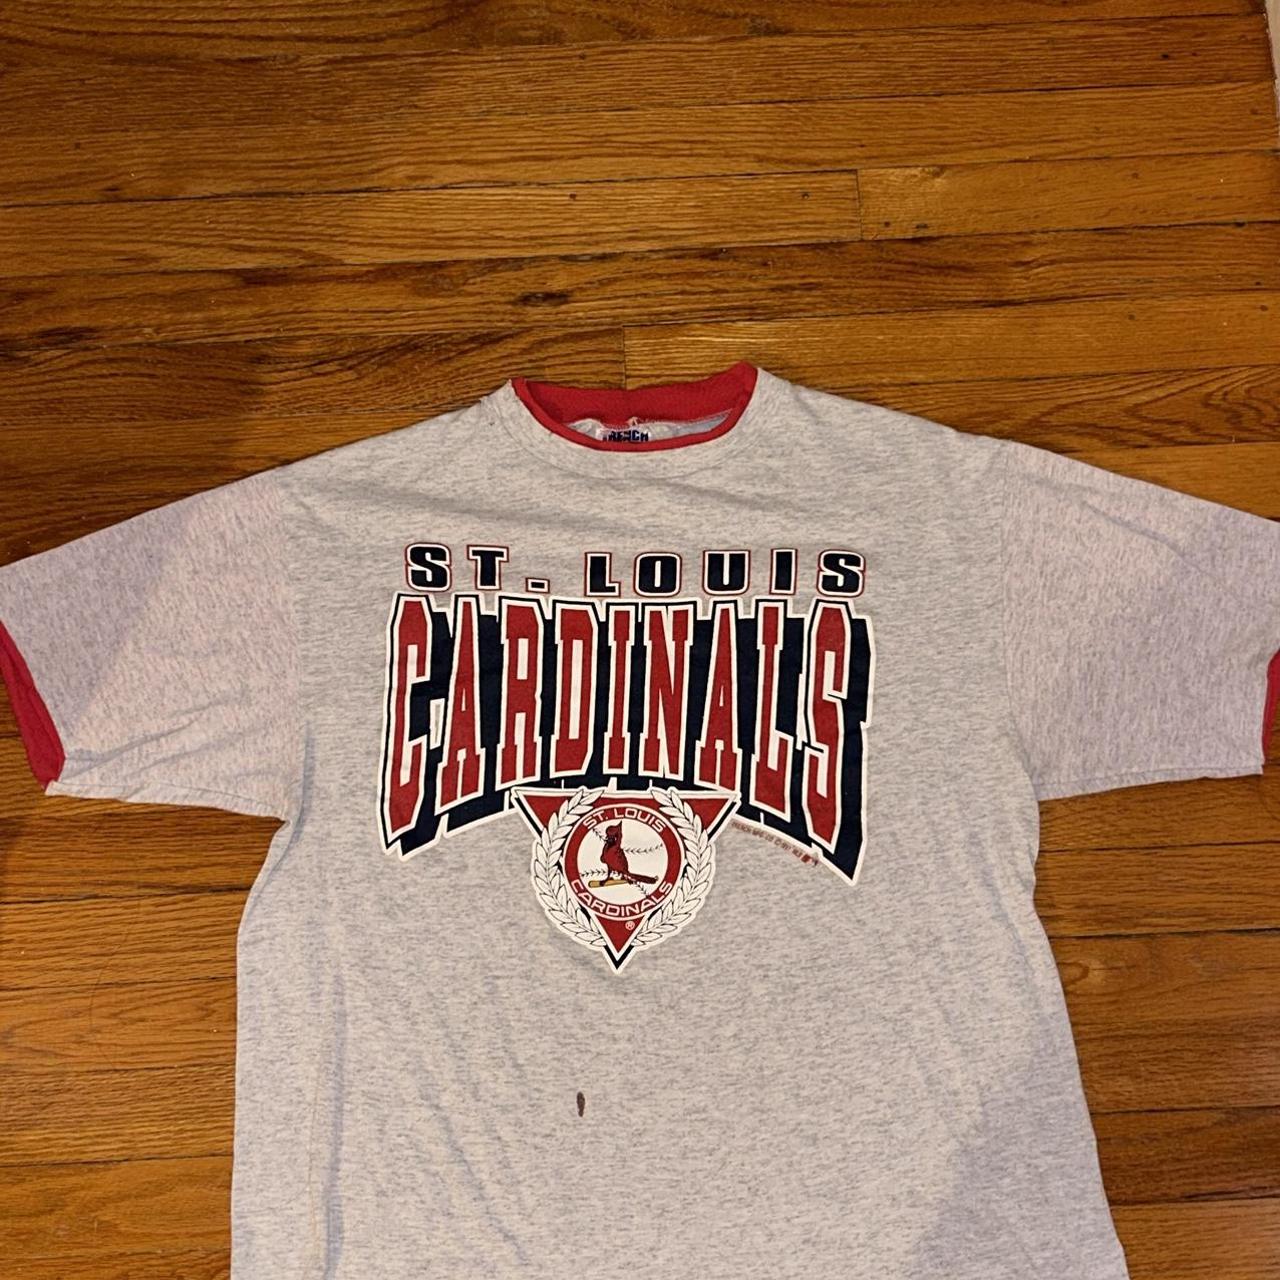 st louis cardinals graphic tee